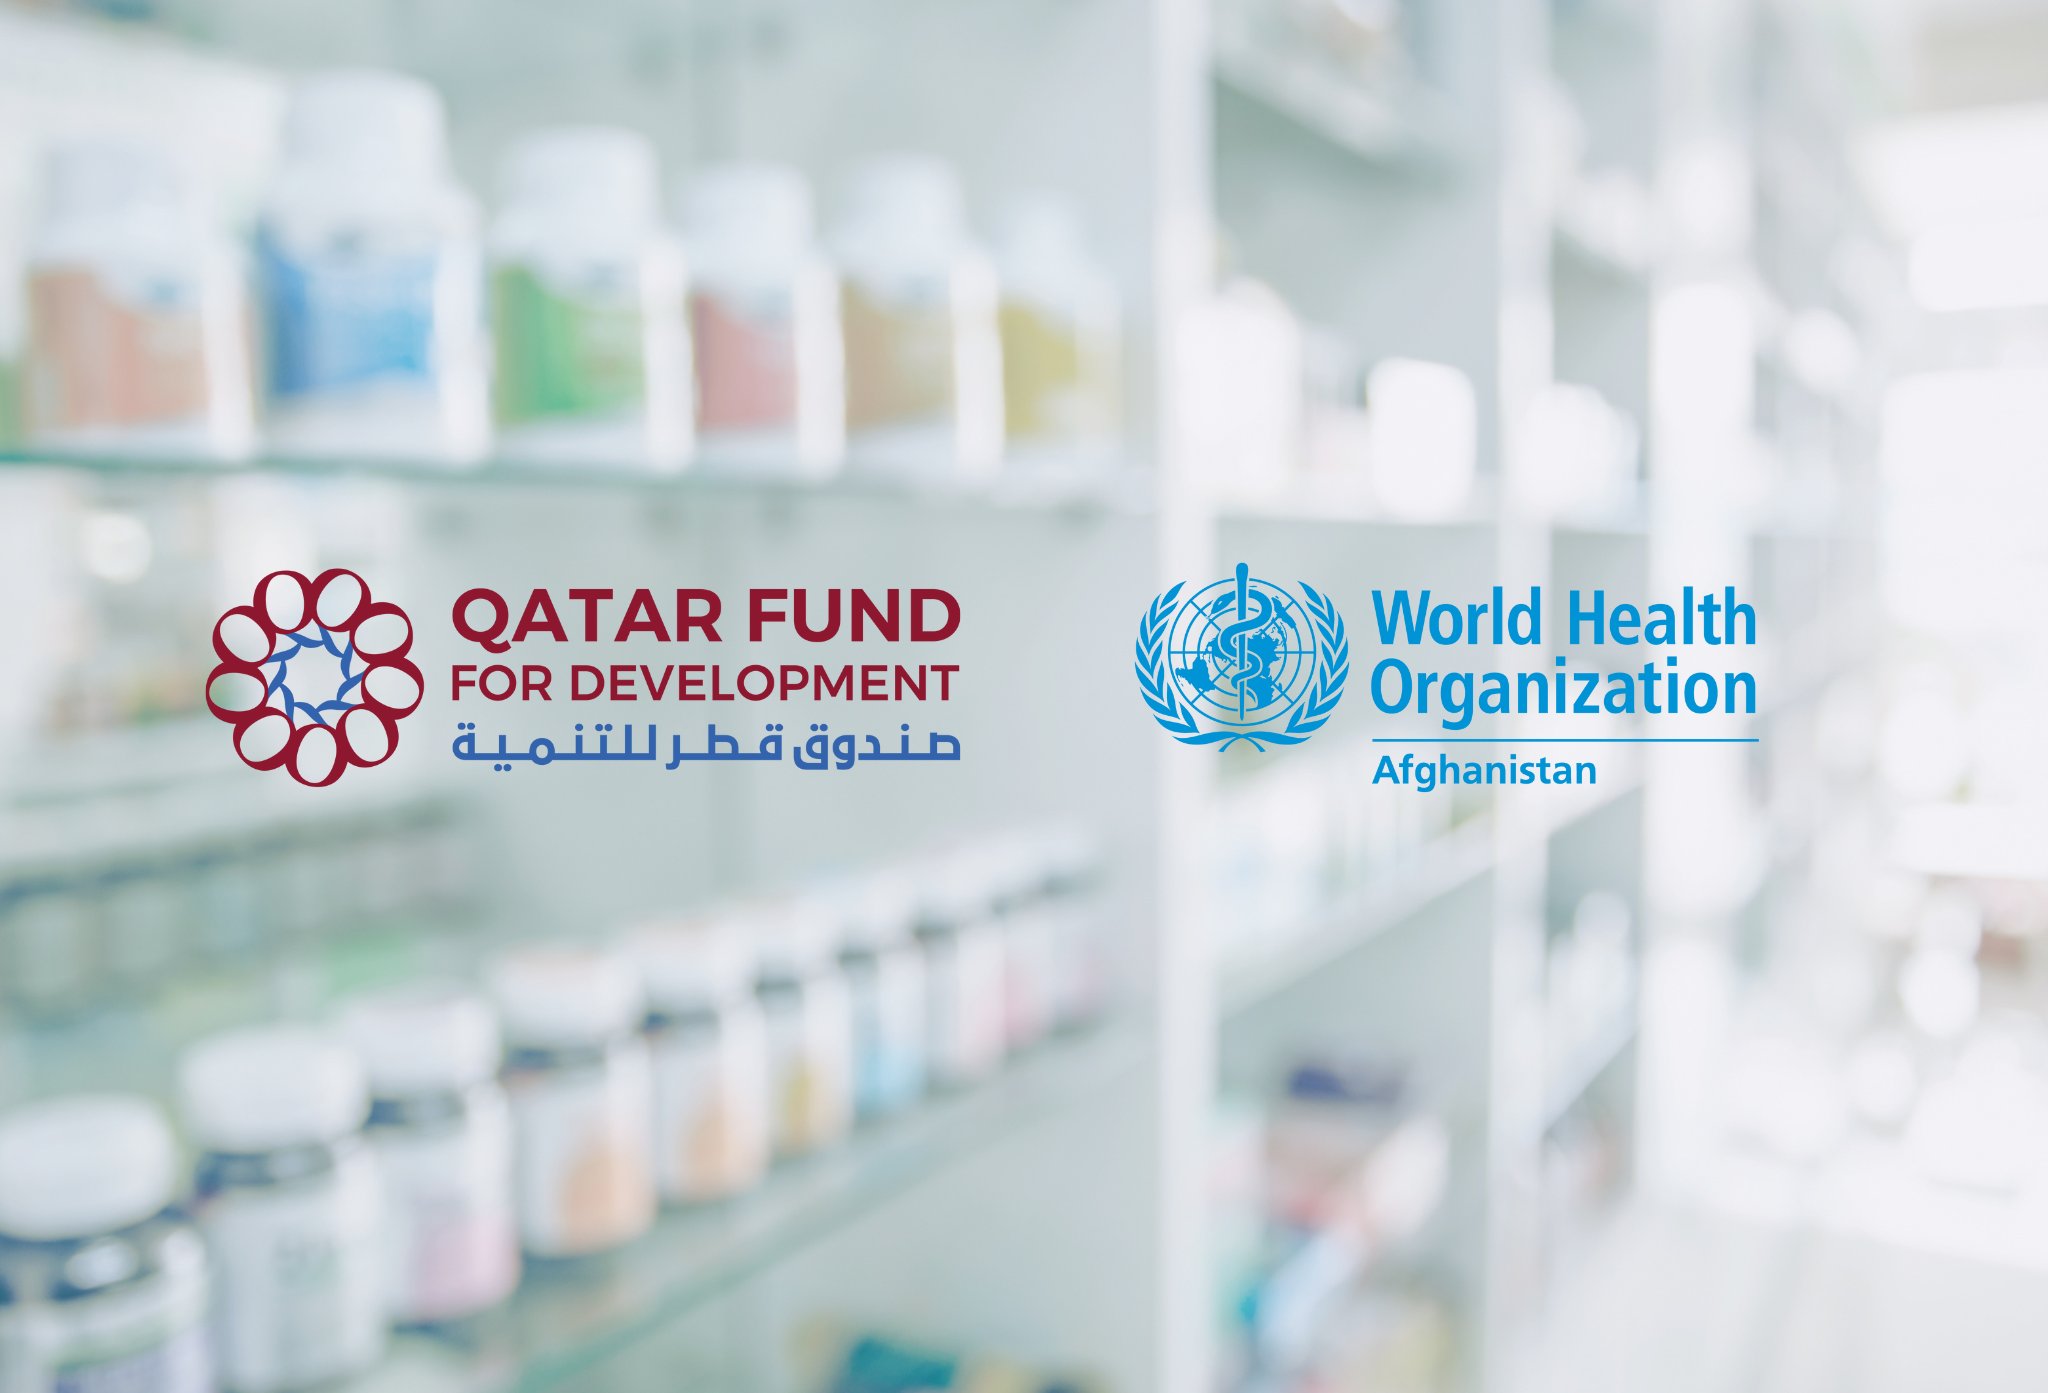 Qatar support provision of health services in underserved areas  